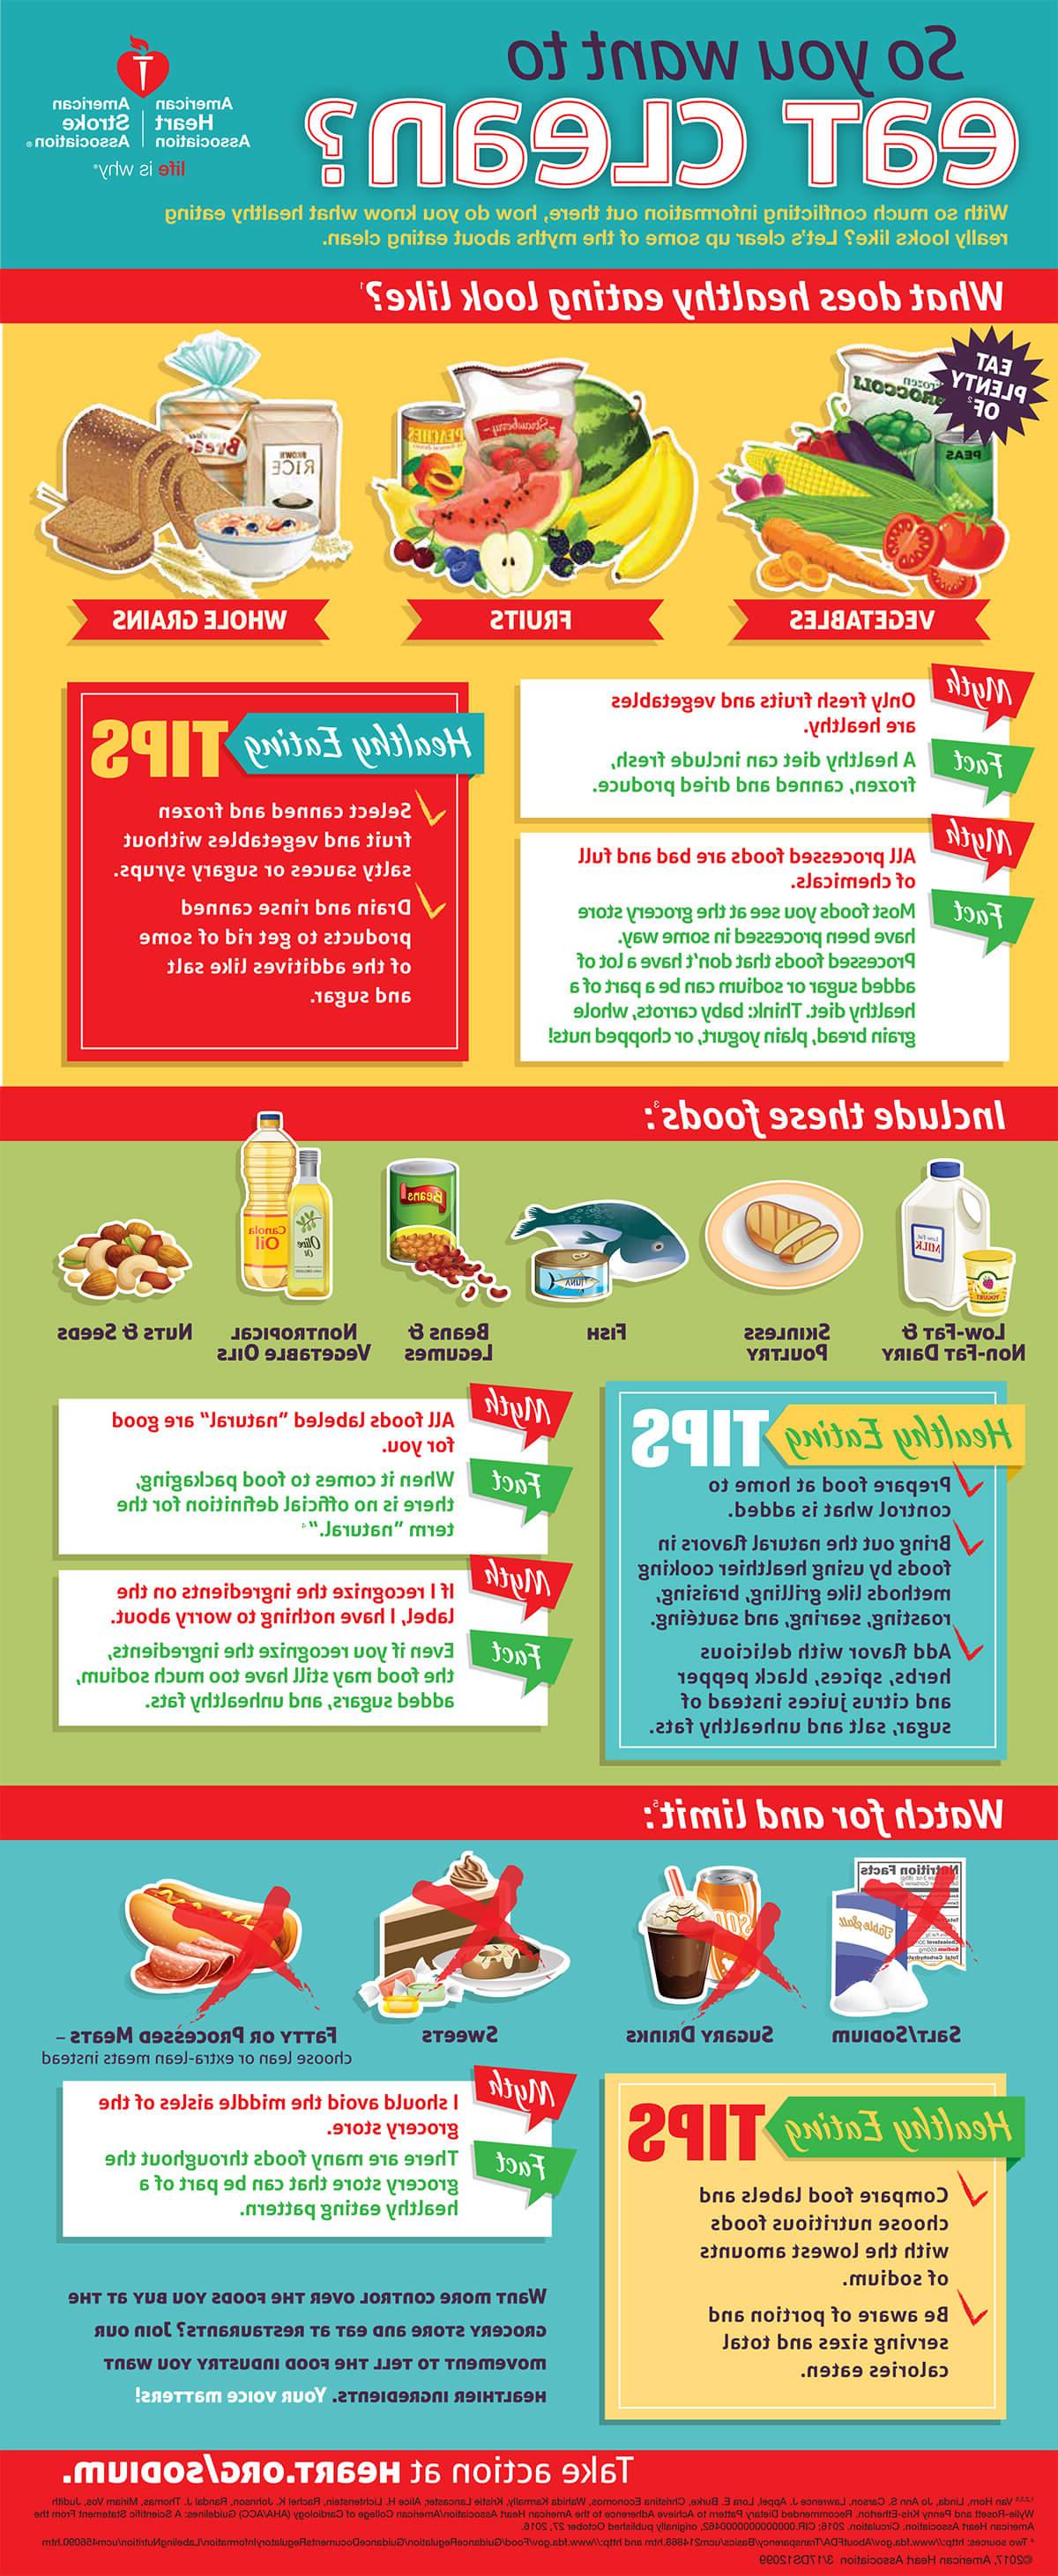 What is clean eating infographic